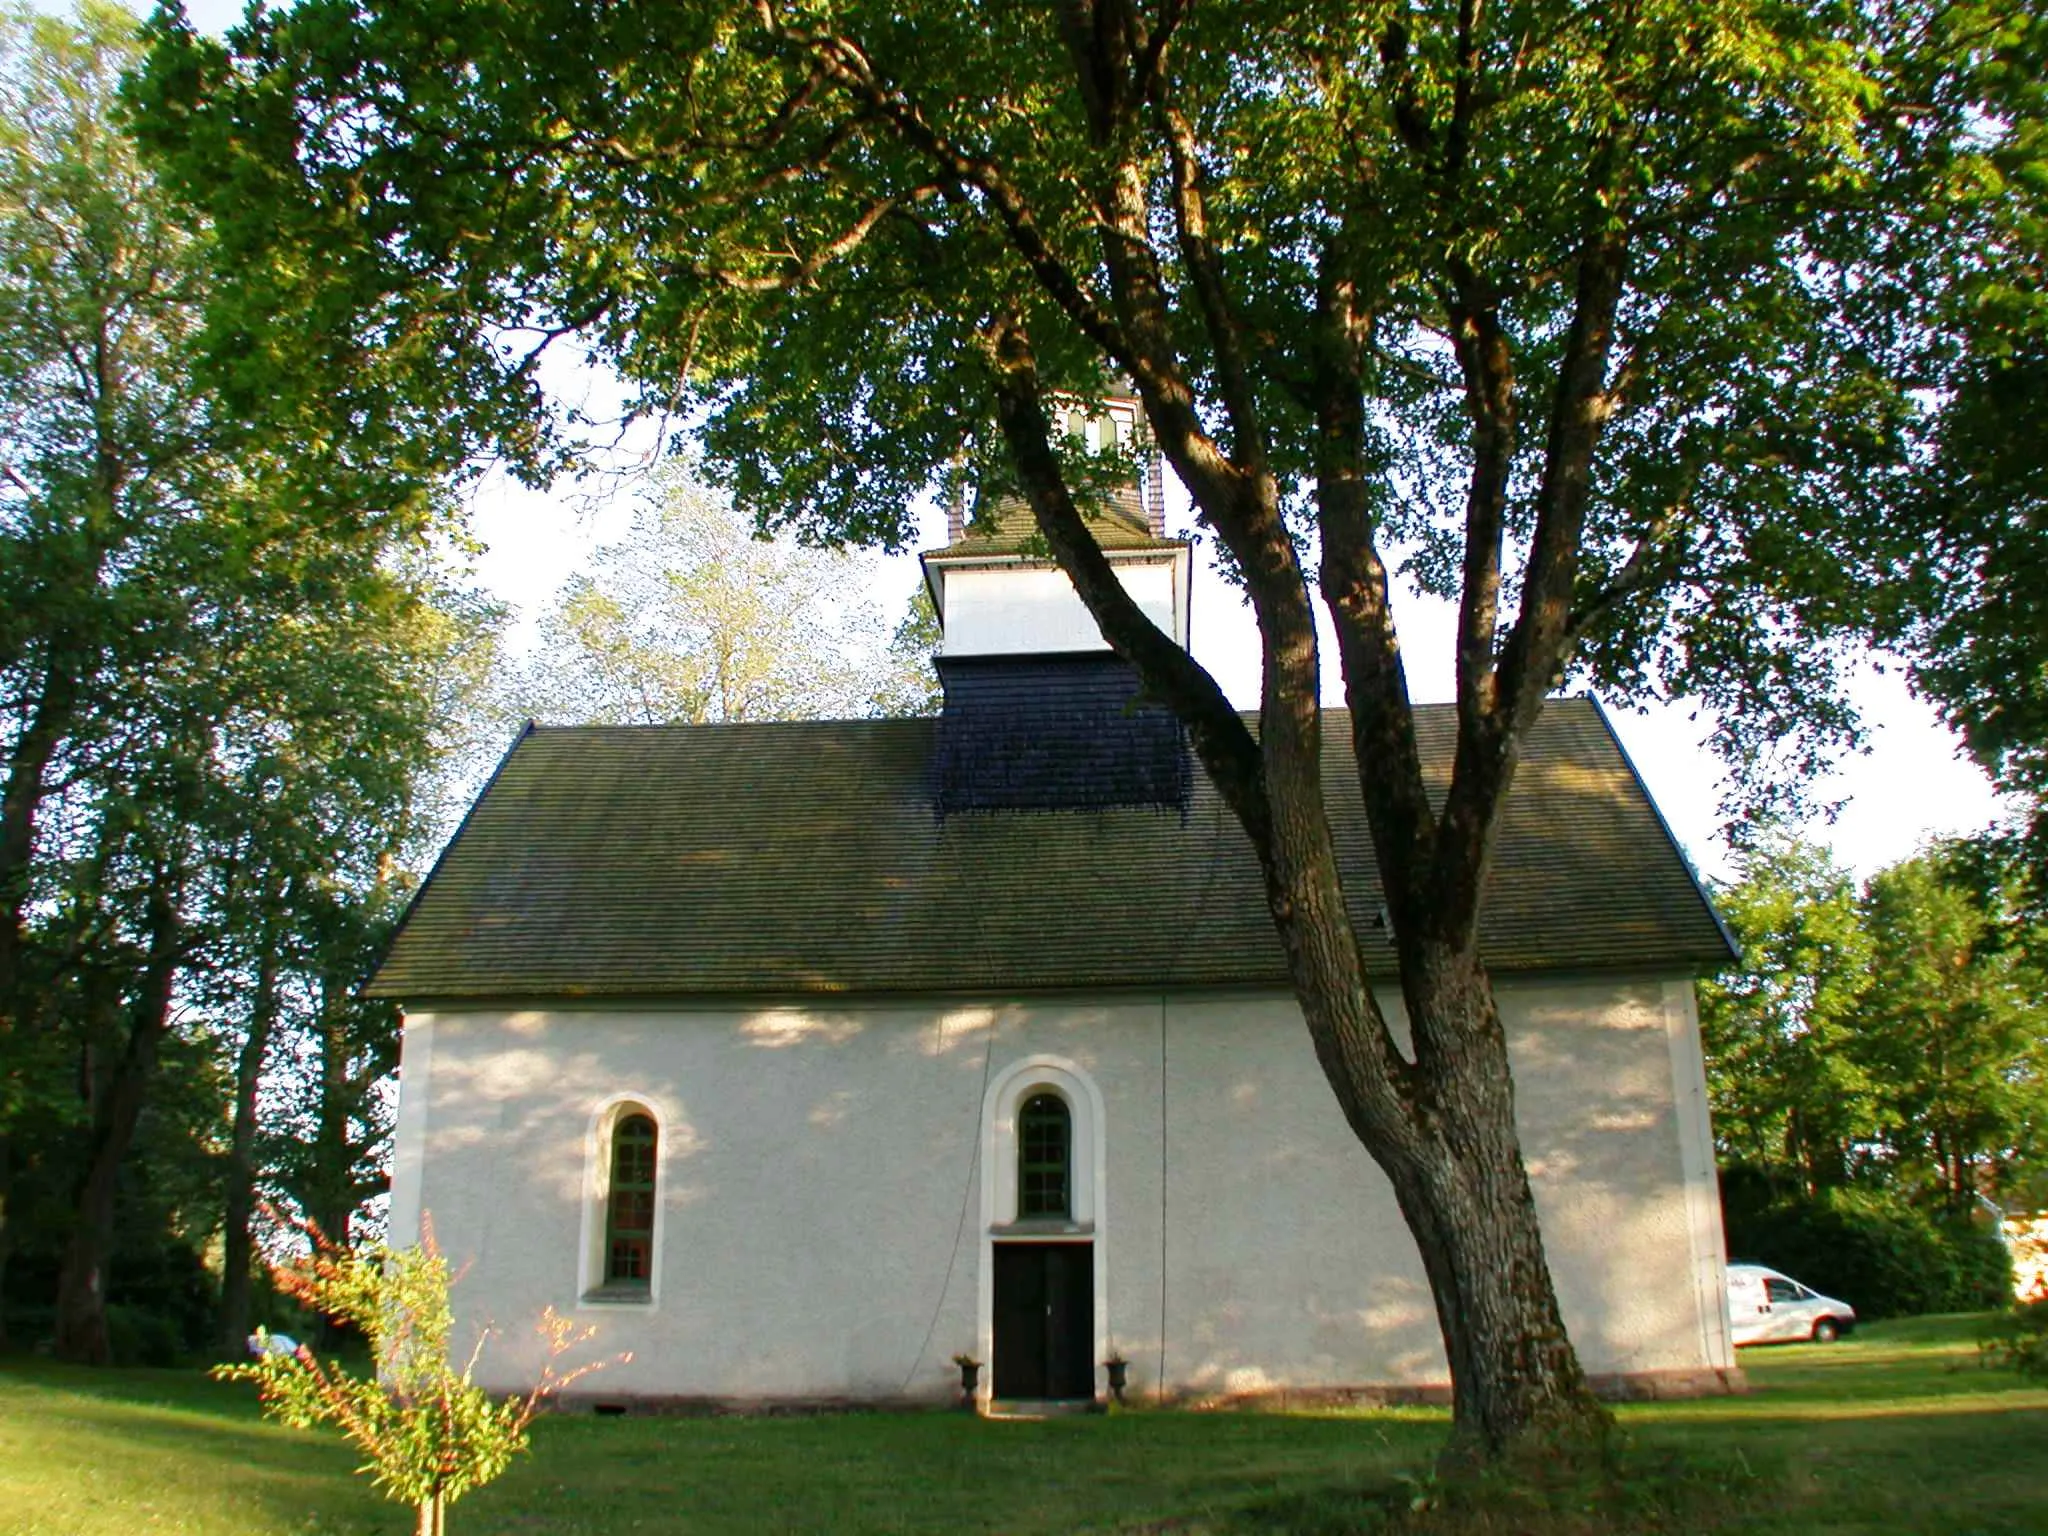 Photo showing: Brunneby church, Motala, Sweden. Photo by Riggwelter, July 12, 2006.